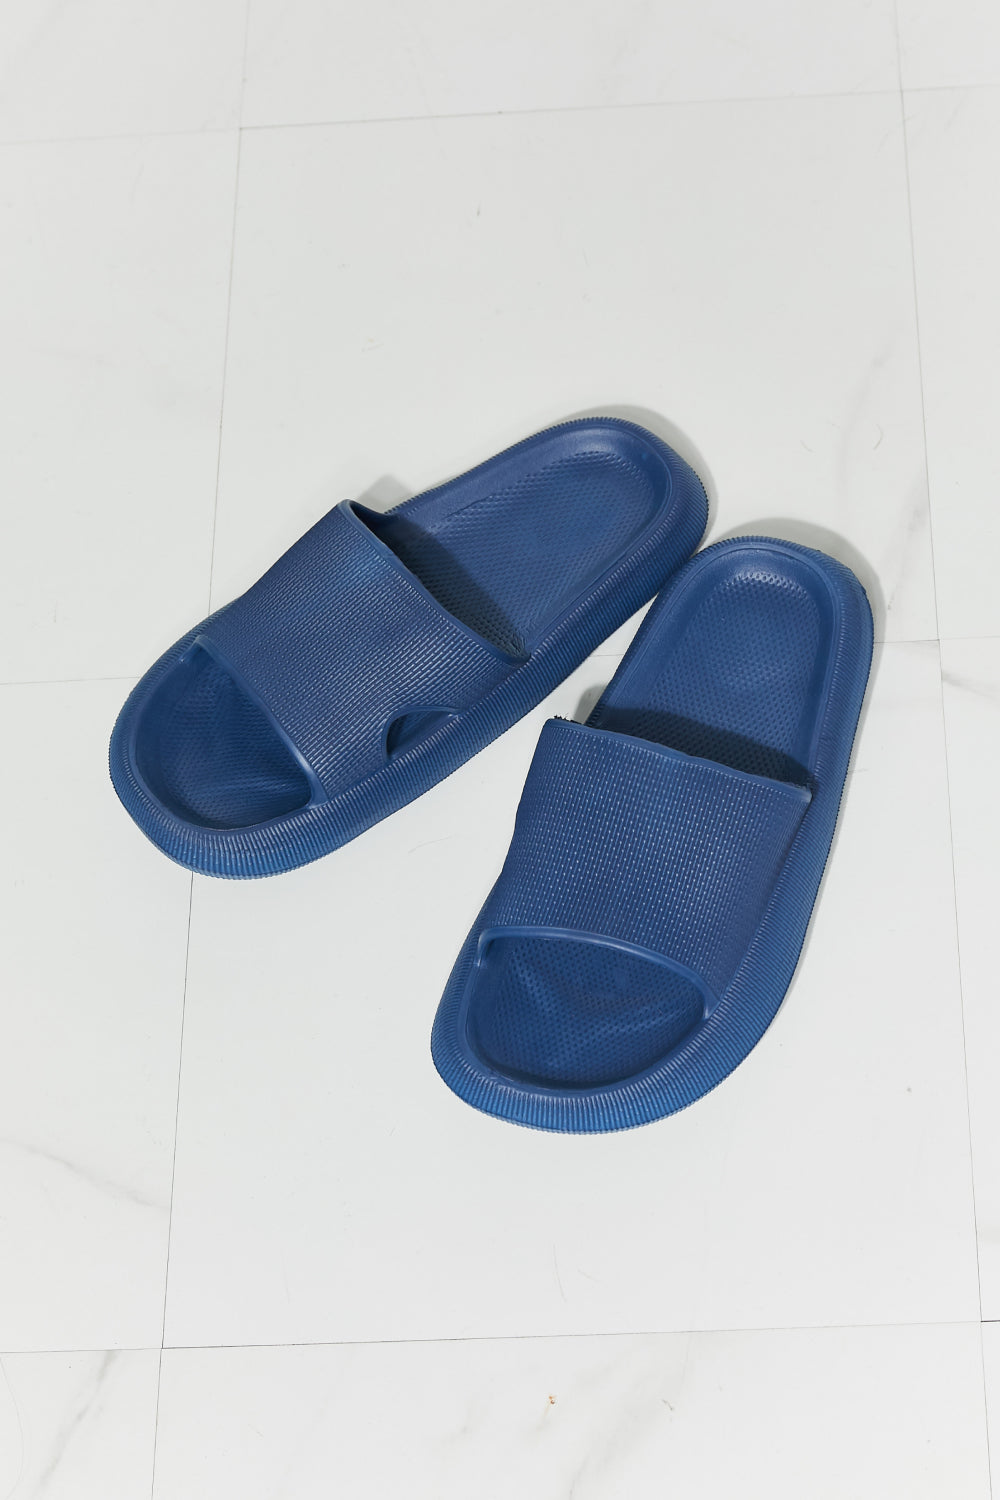 MMShoes Arms Around Me Open Toe Slide in Navy - Shop women apparel, Jewelry, bath & beauty products online - Arwen's Boutique